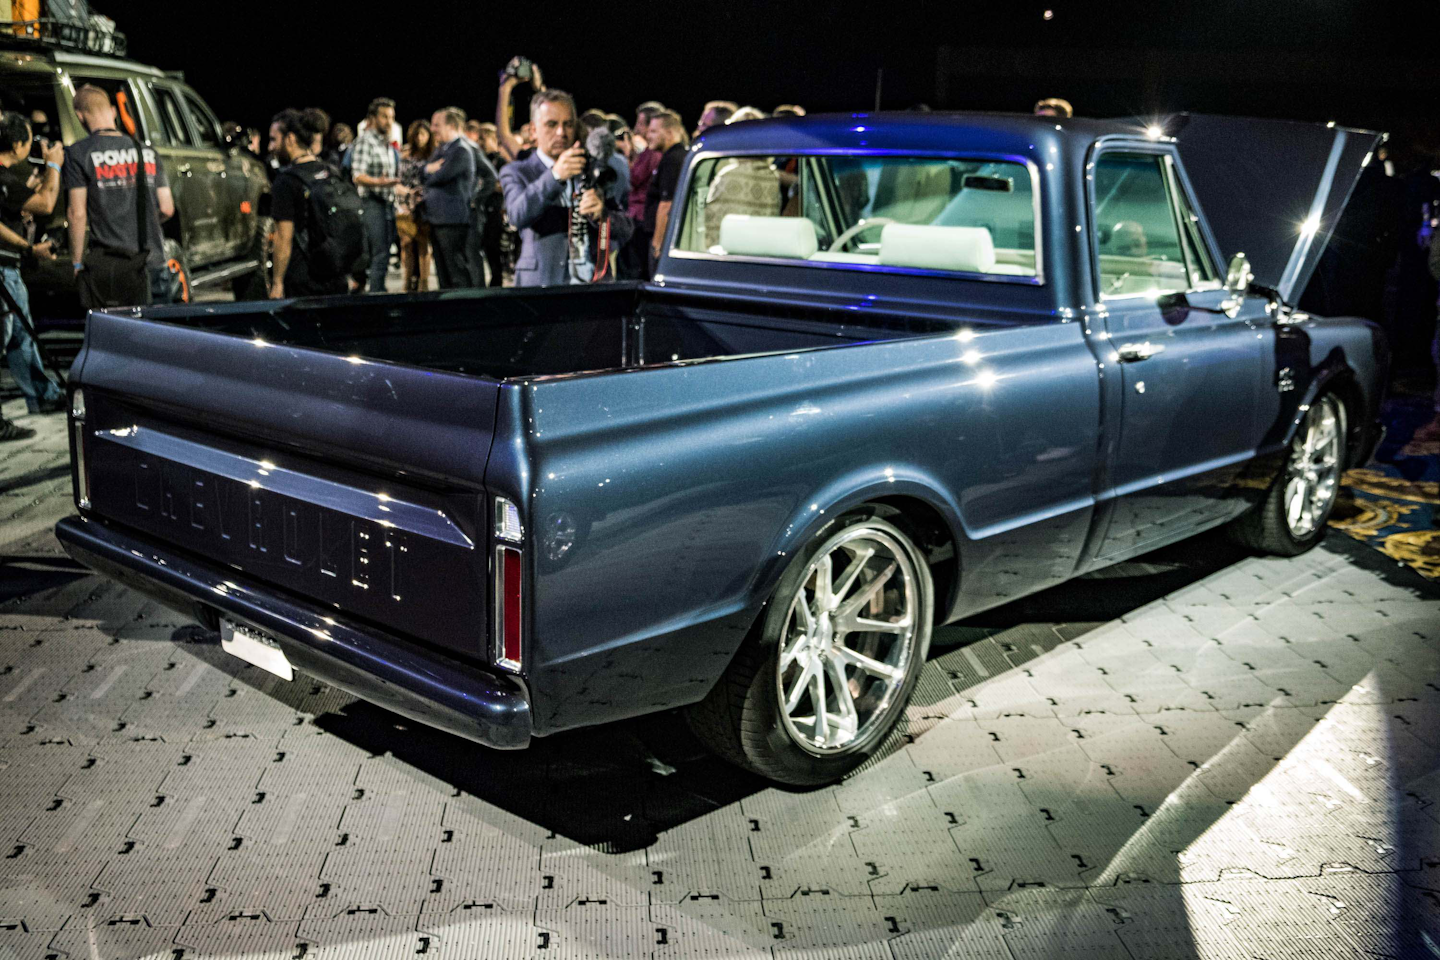 Chevy Rebuilt A 67 C 10 With A 405 Hp Zz6 To Celebrate 100 Years Of Truck Making Equipment World